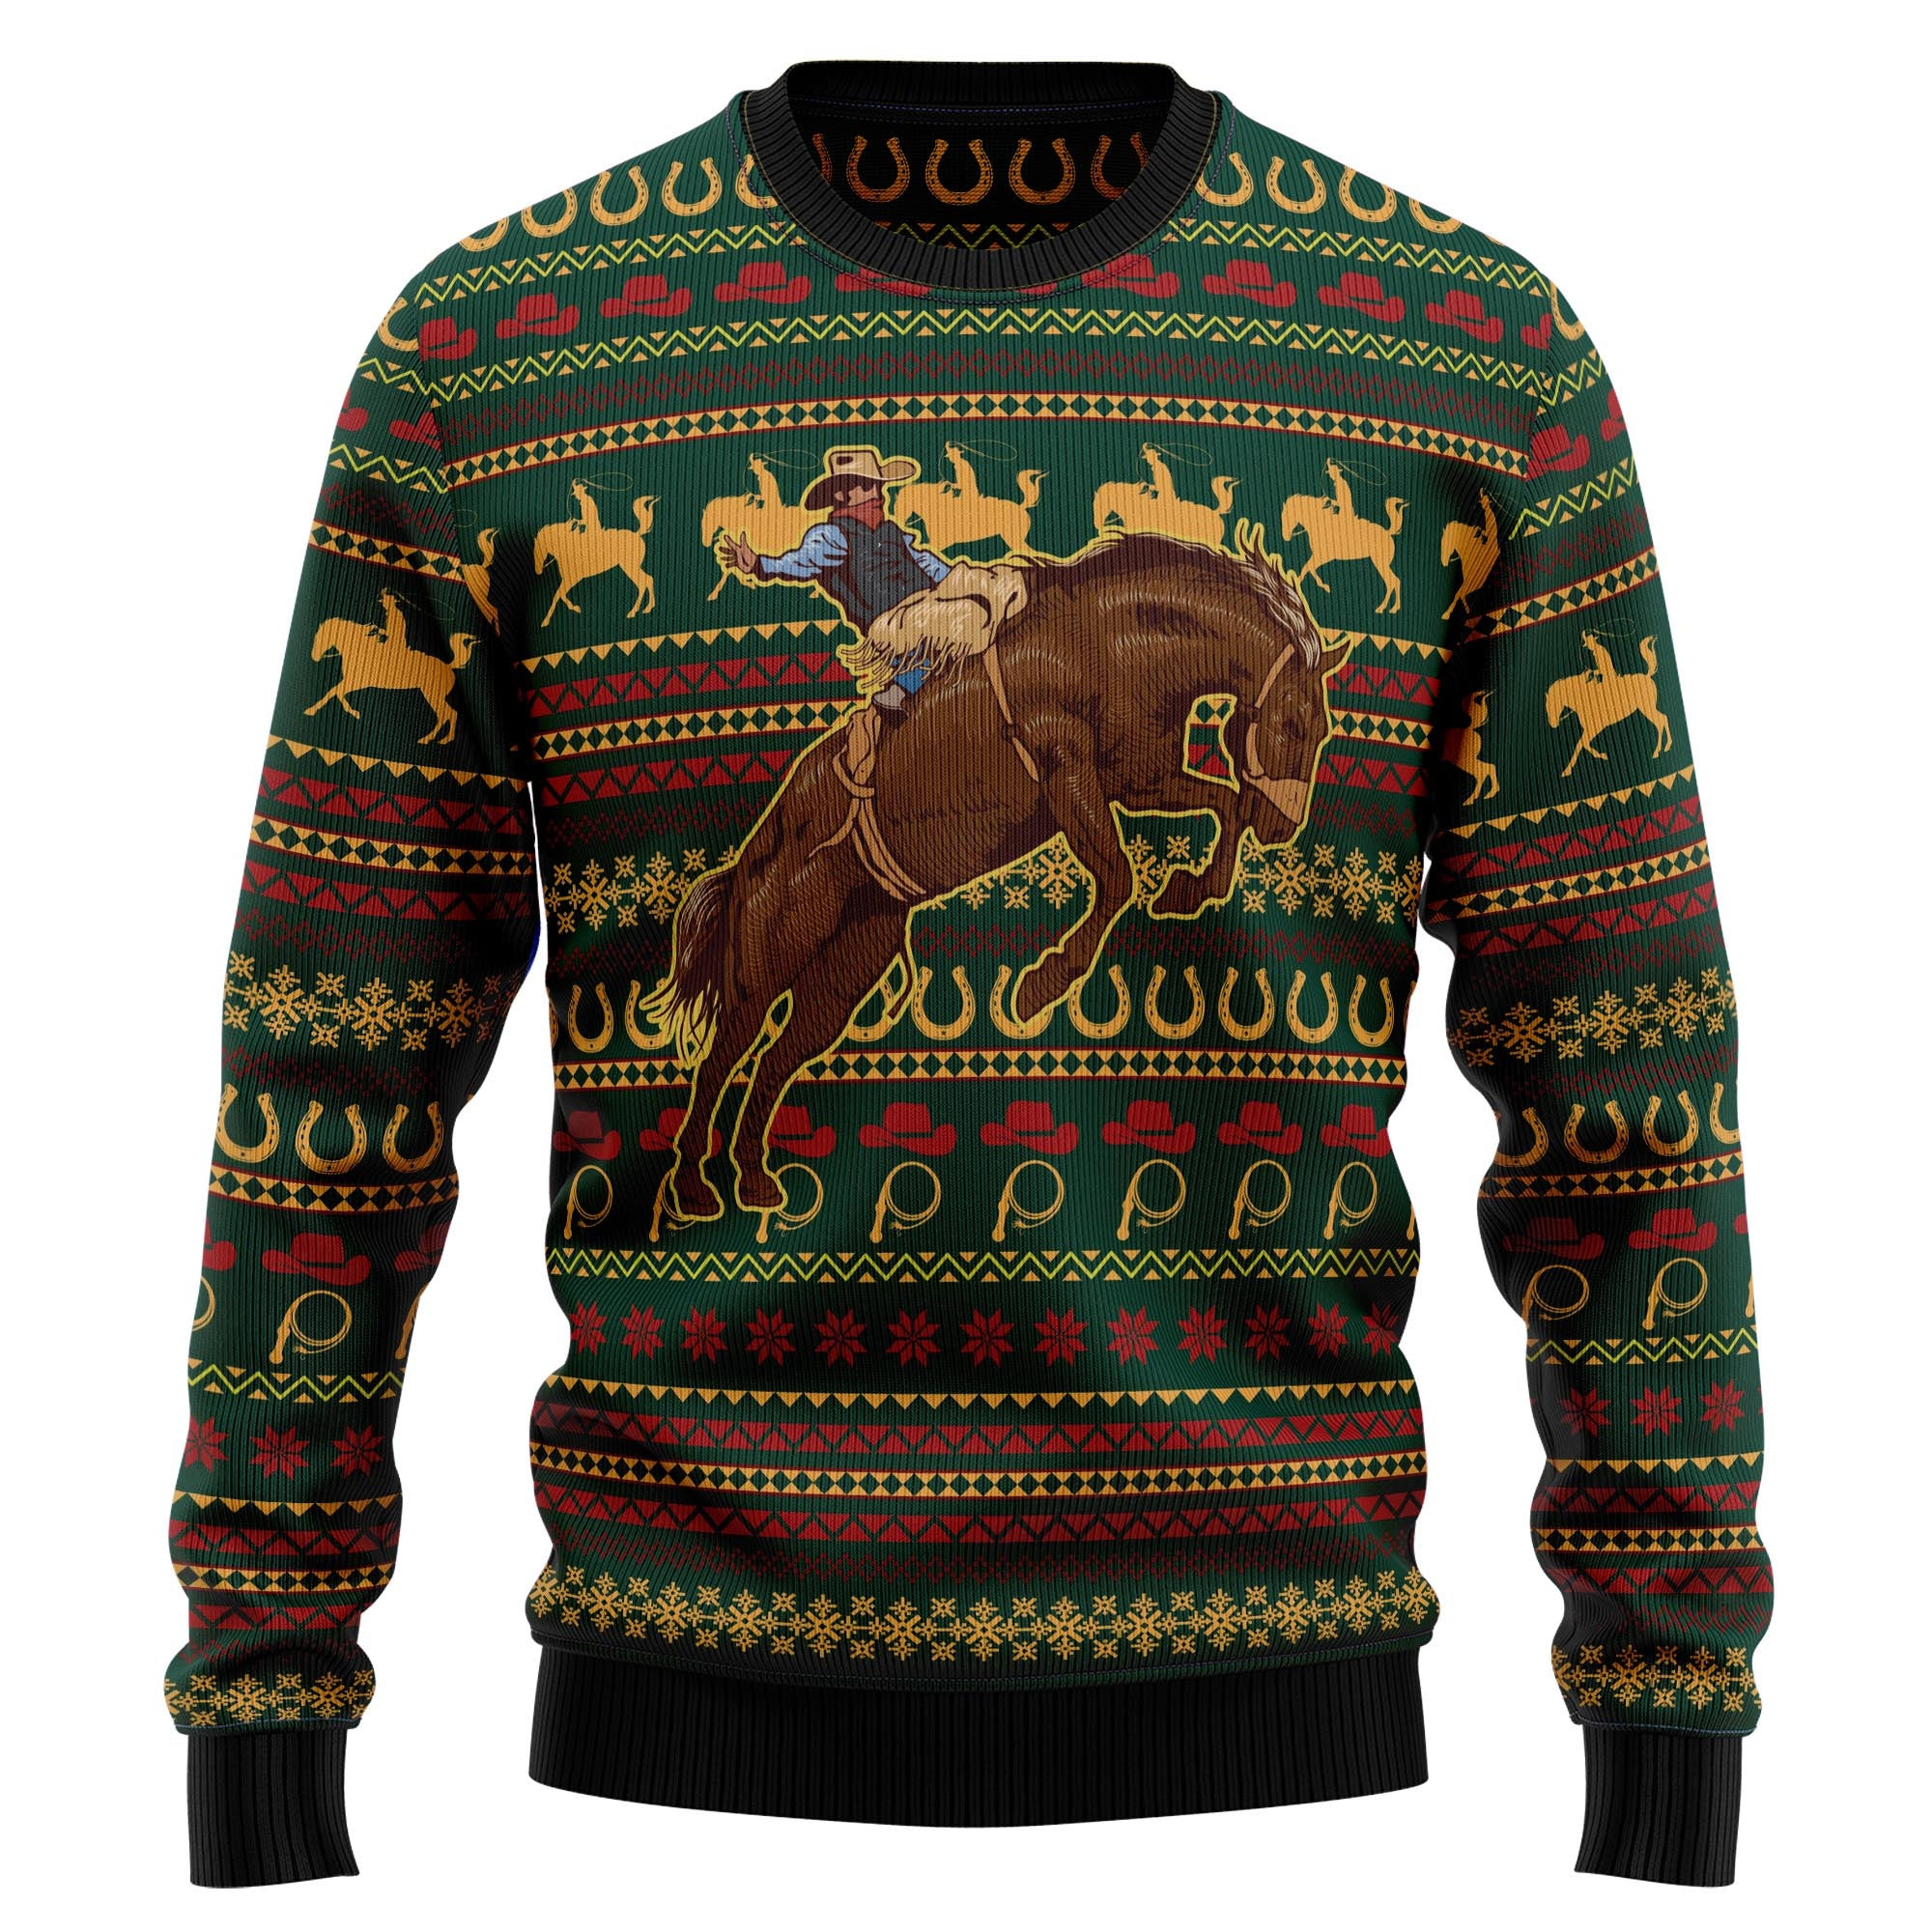 Amazing Cowboy Ugly Christmas Sweater, Ugly Sweater For Men Women, Holiday Sweater